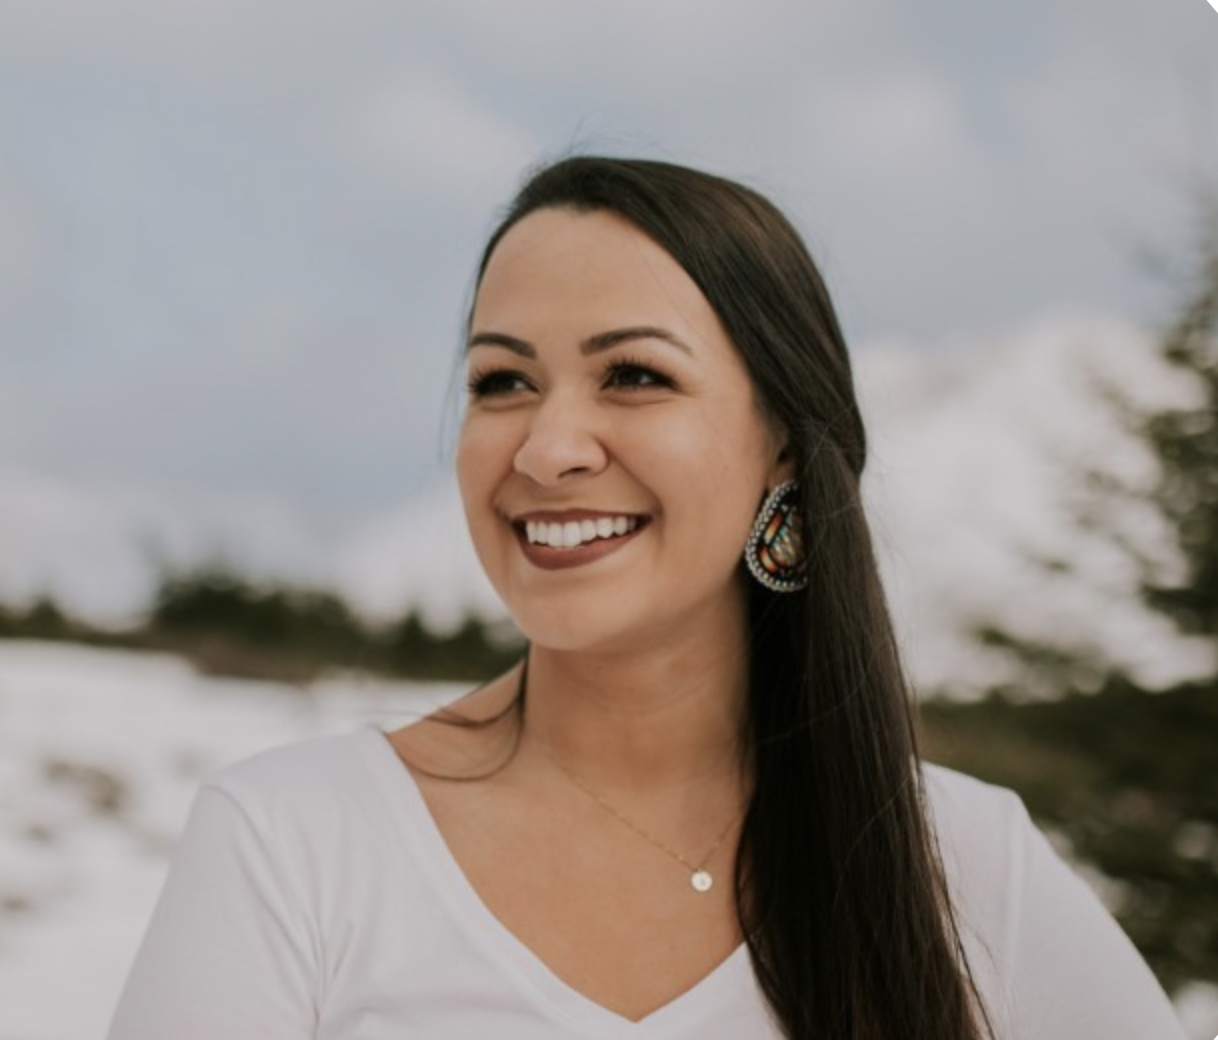 Karli Tyance Hassell (woman with brown hair, tan skin, wearing lipstick and earrings) gazes into middle distance - smiling. Karli is wearing a white top and has a mountain scene behind her.  